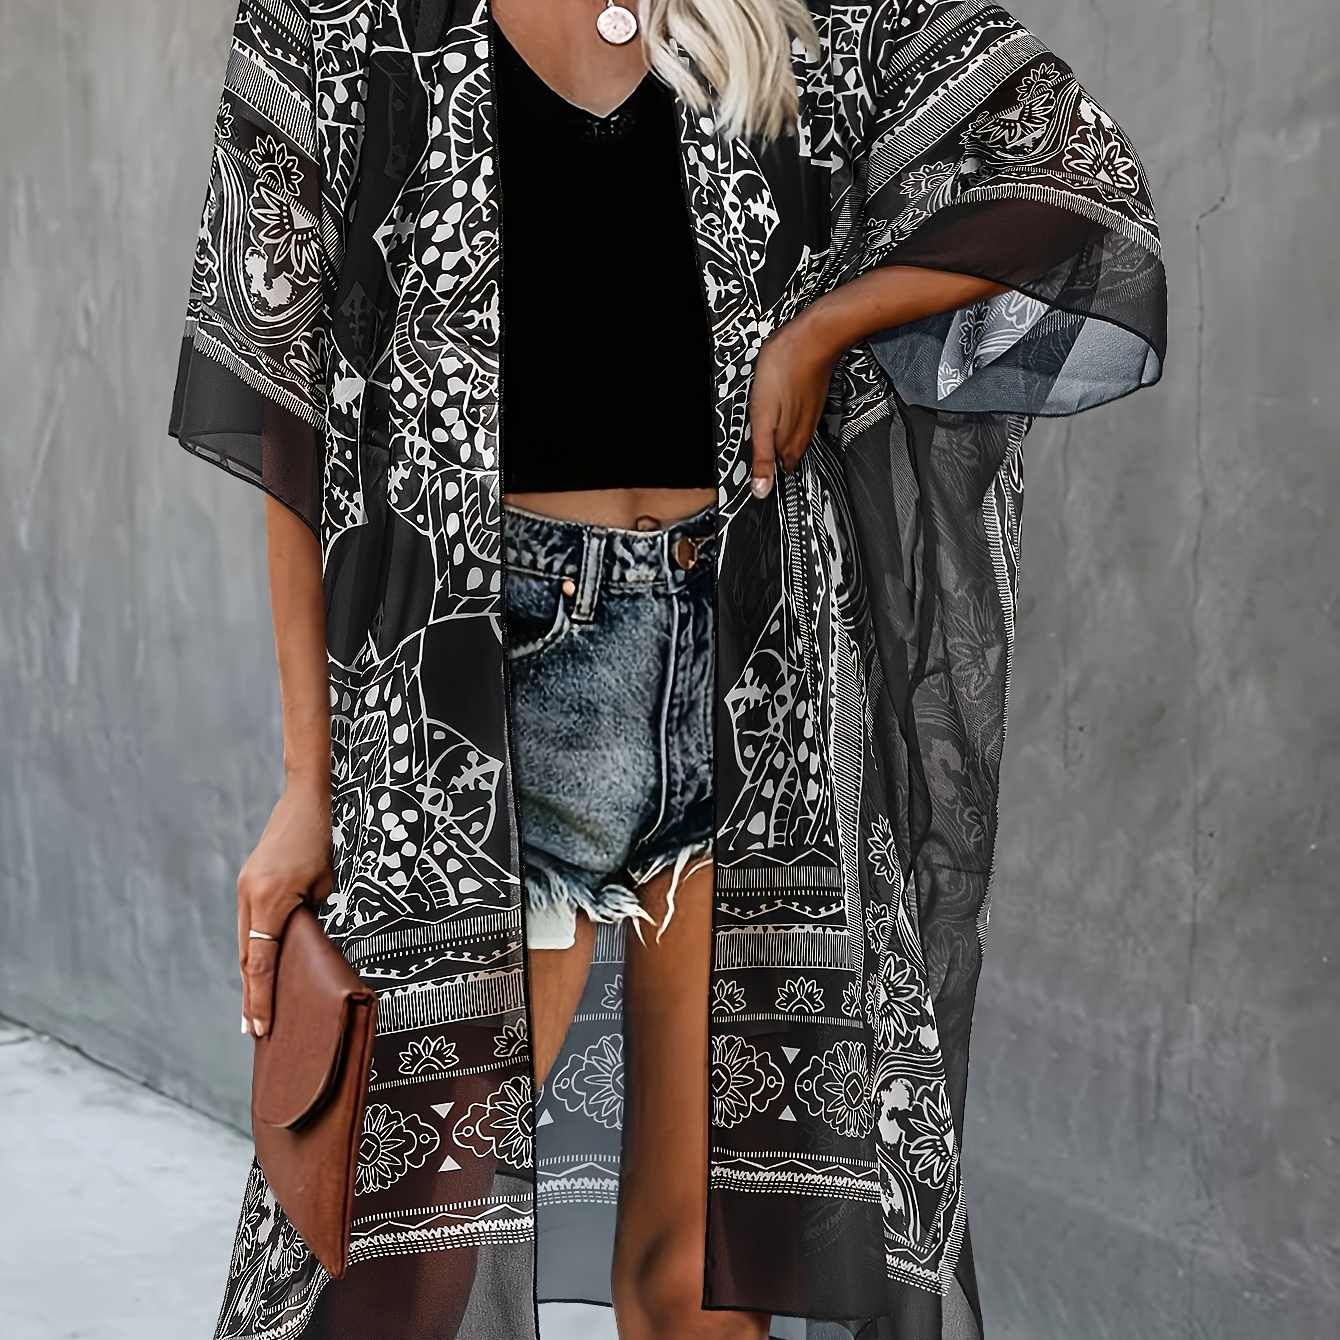 

Women's Bohemian Printed Kimono Cardigan, Casual Elegant Vacation Style, Open Front Top, Lightweight Summer Cover-up, Loose Fit Beachwear Outwear